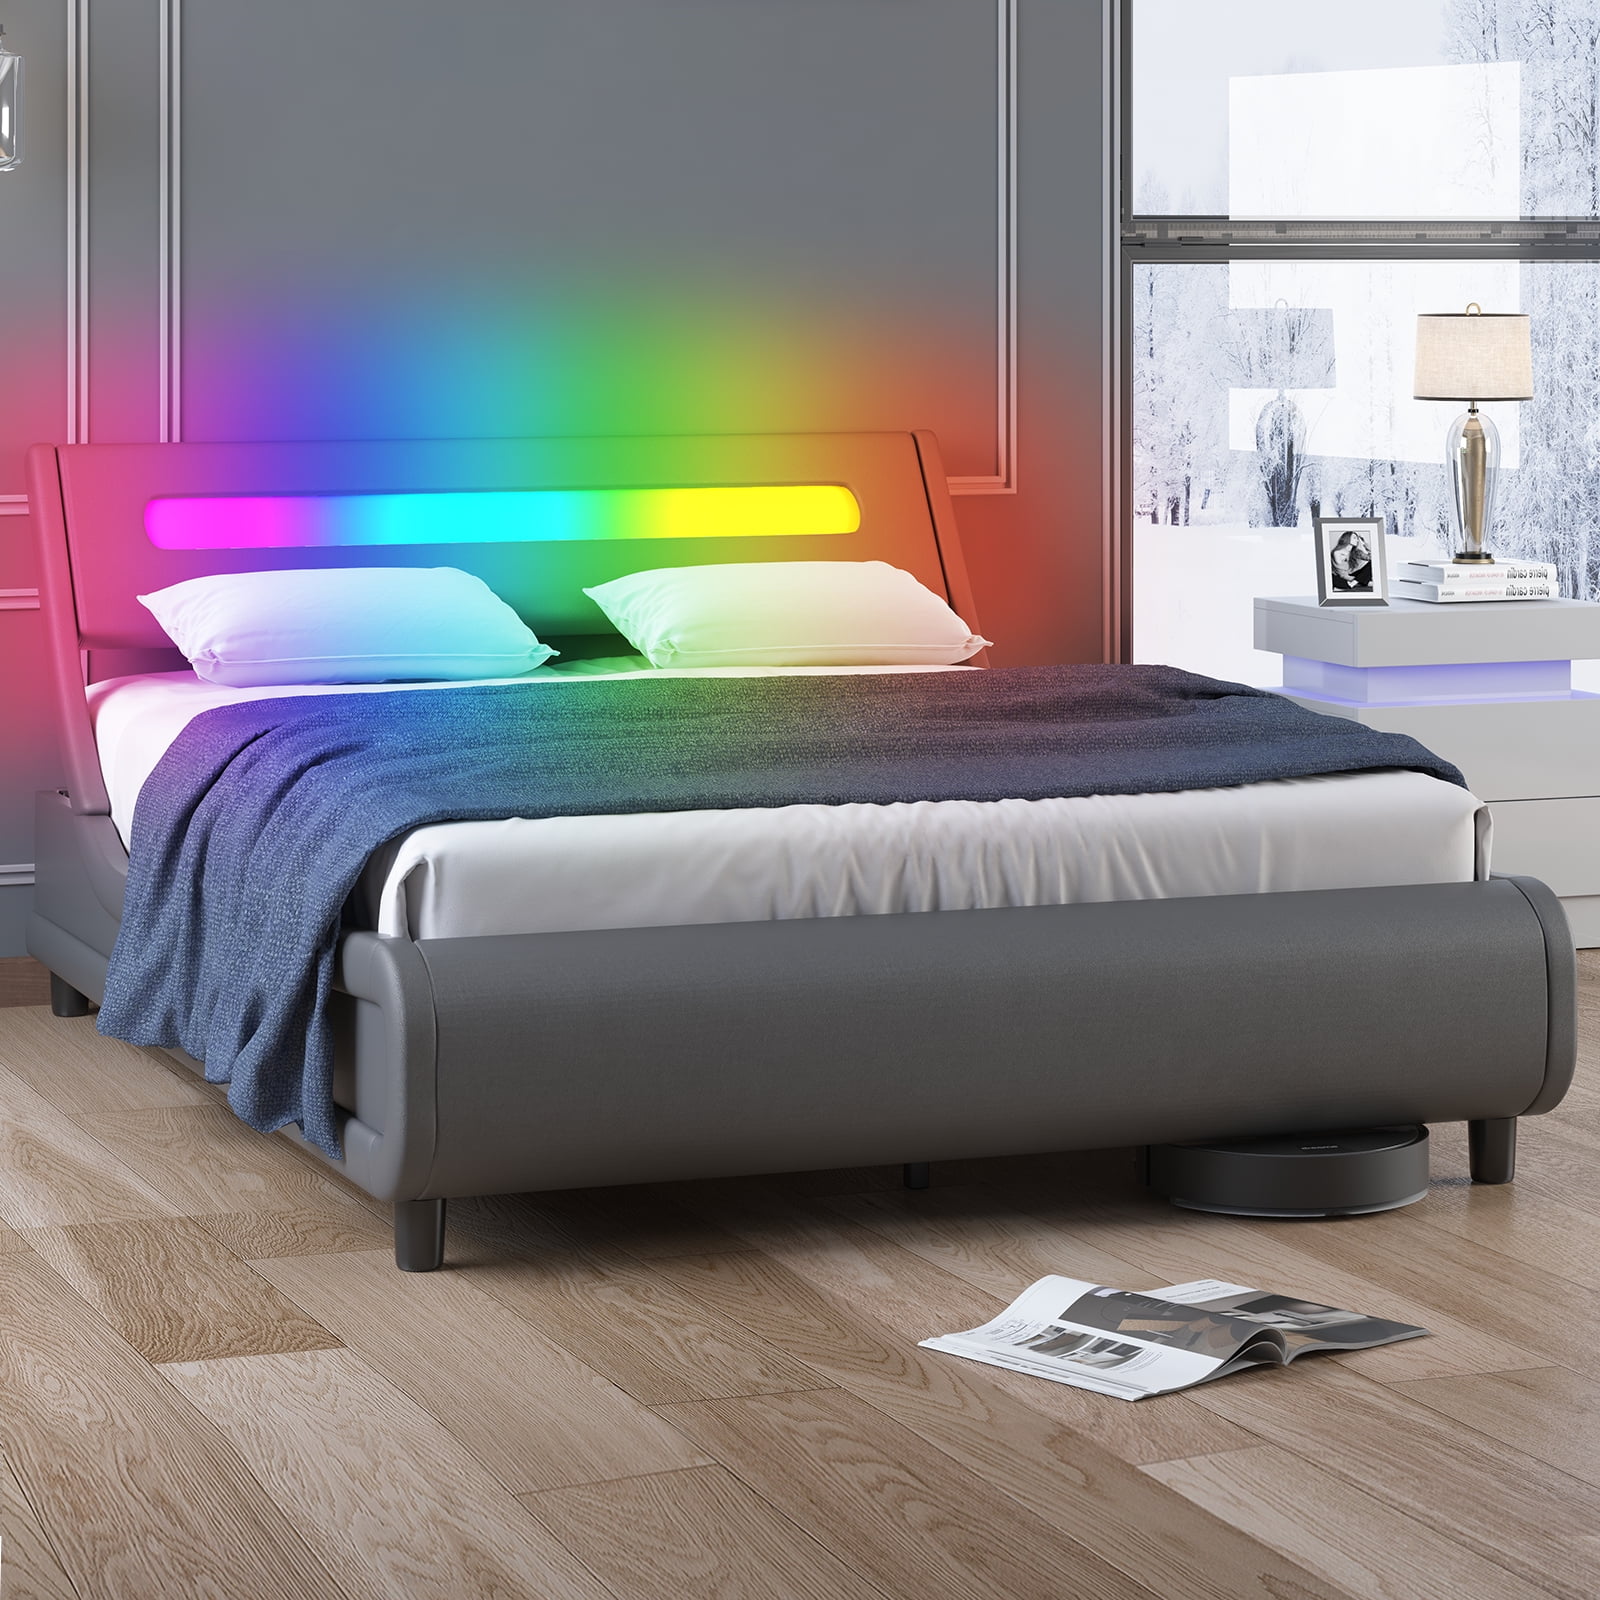 ijuicy King Size Bed Frame with RGB LED Headboard, LED Bed Frame with ...